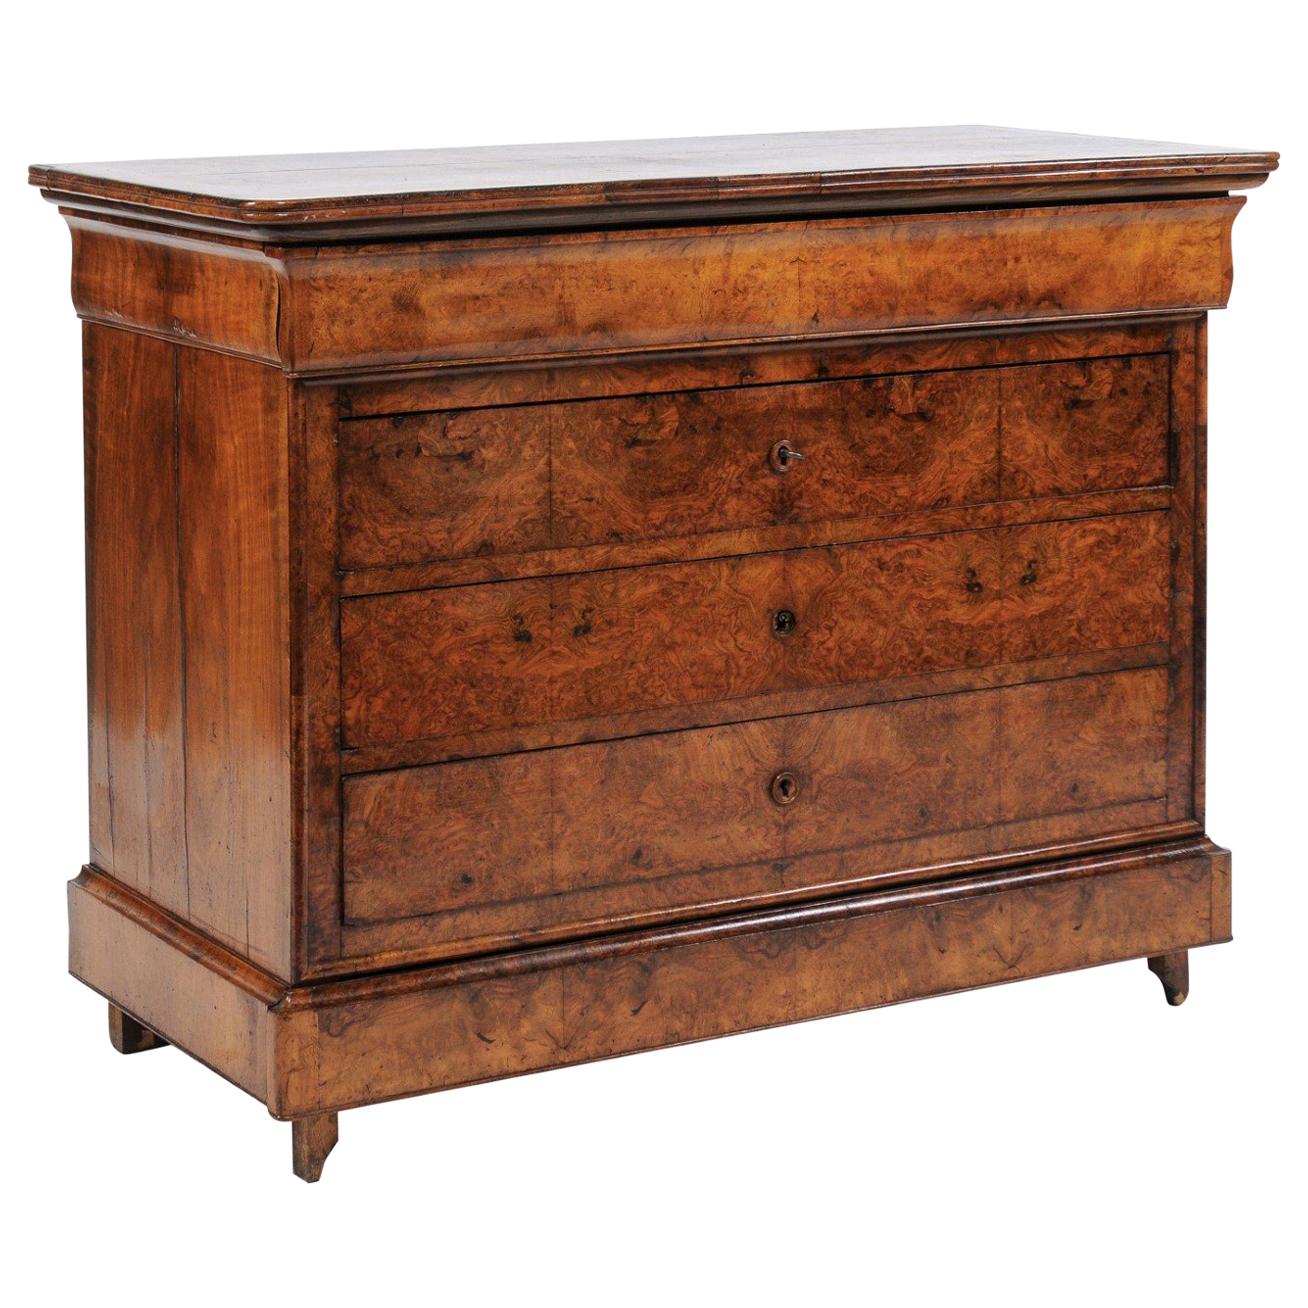 French Louis-Philippe 1850s Burled Wood Five-Drawer Commode with Bookmark Veneer